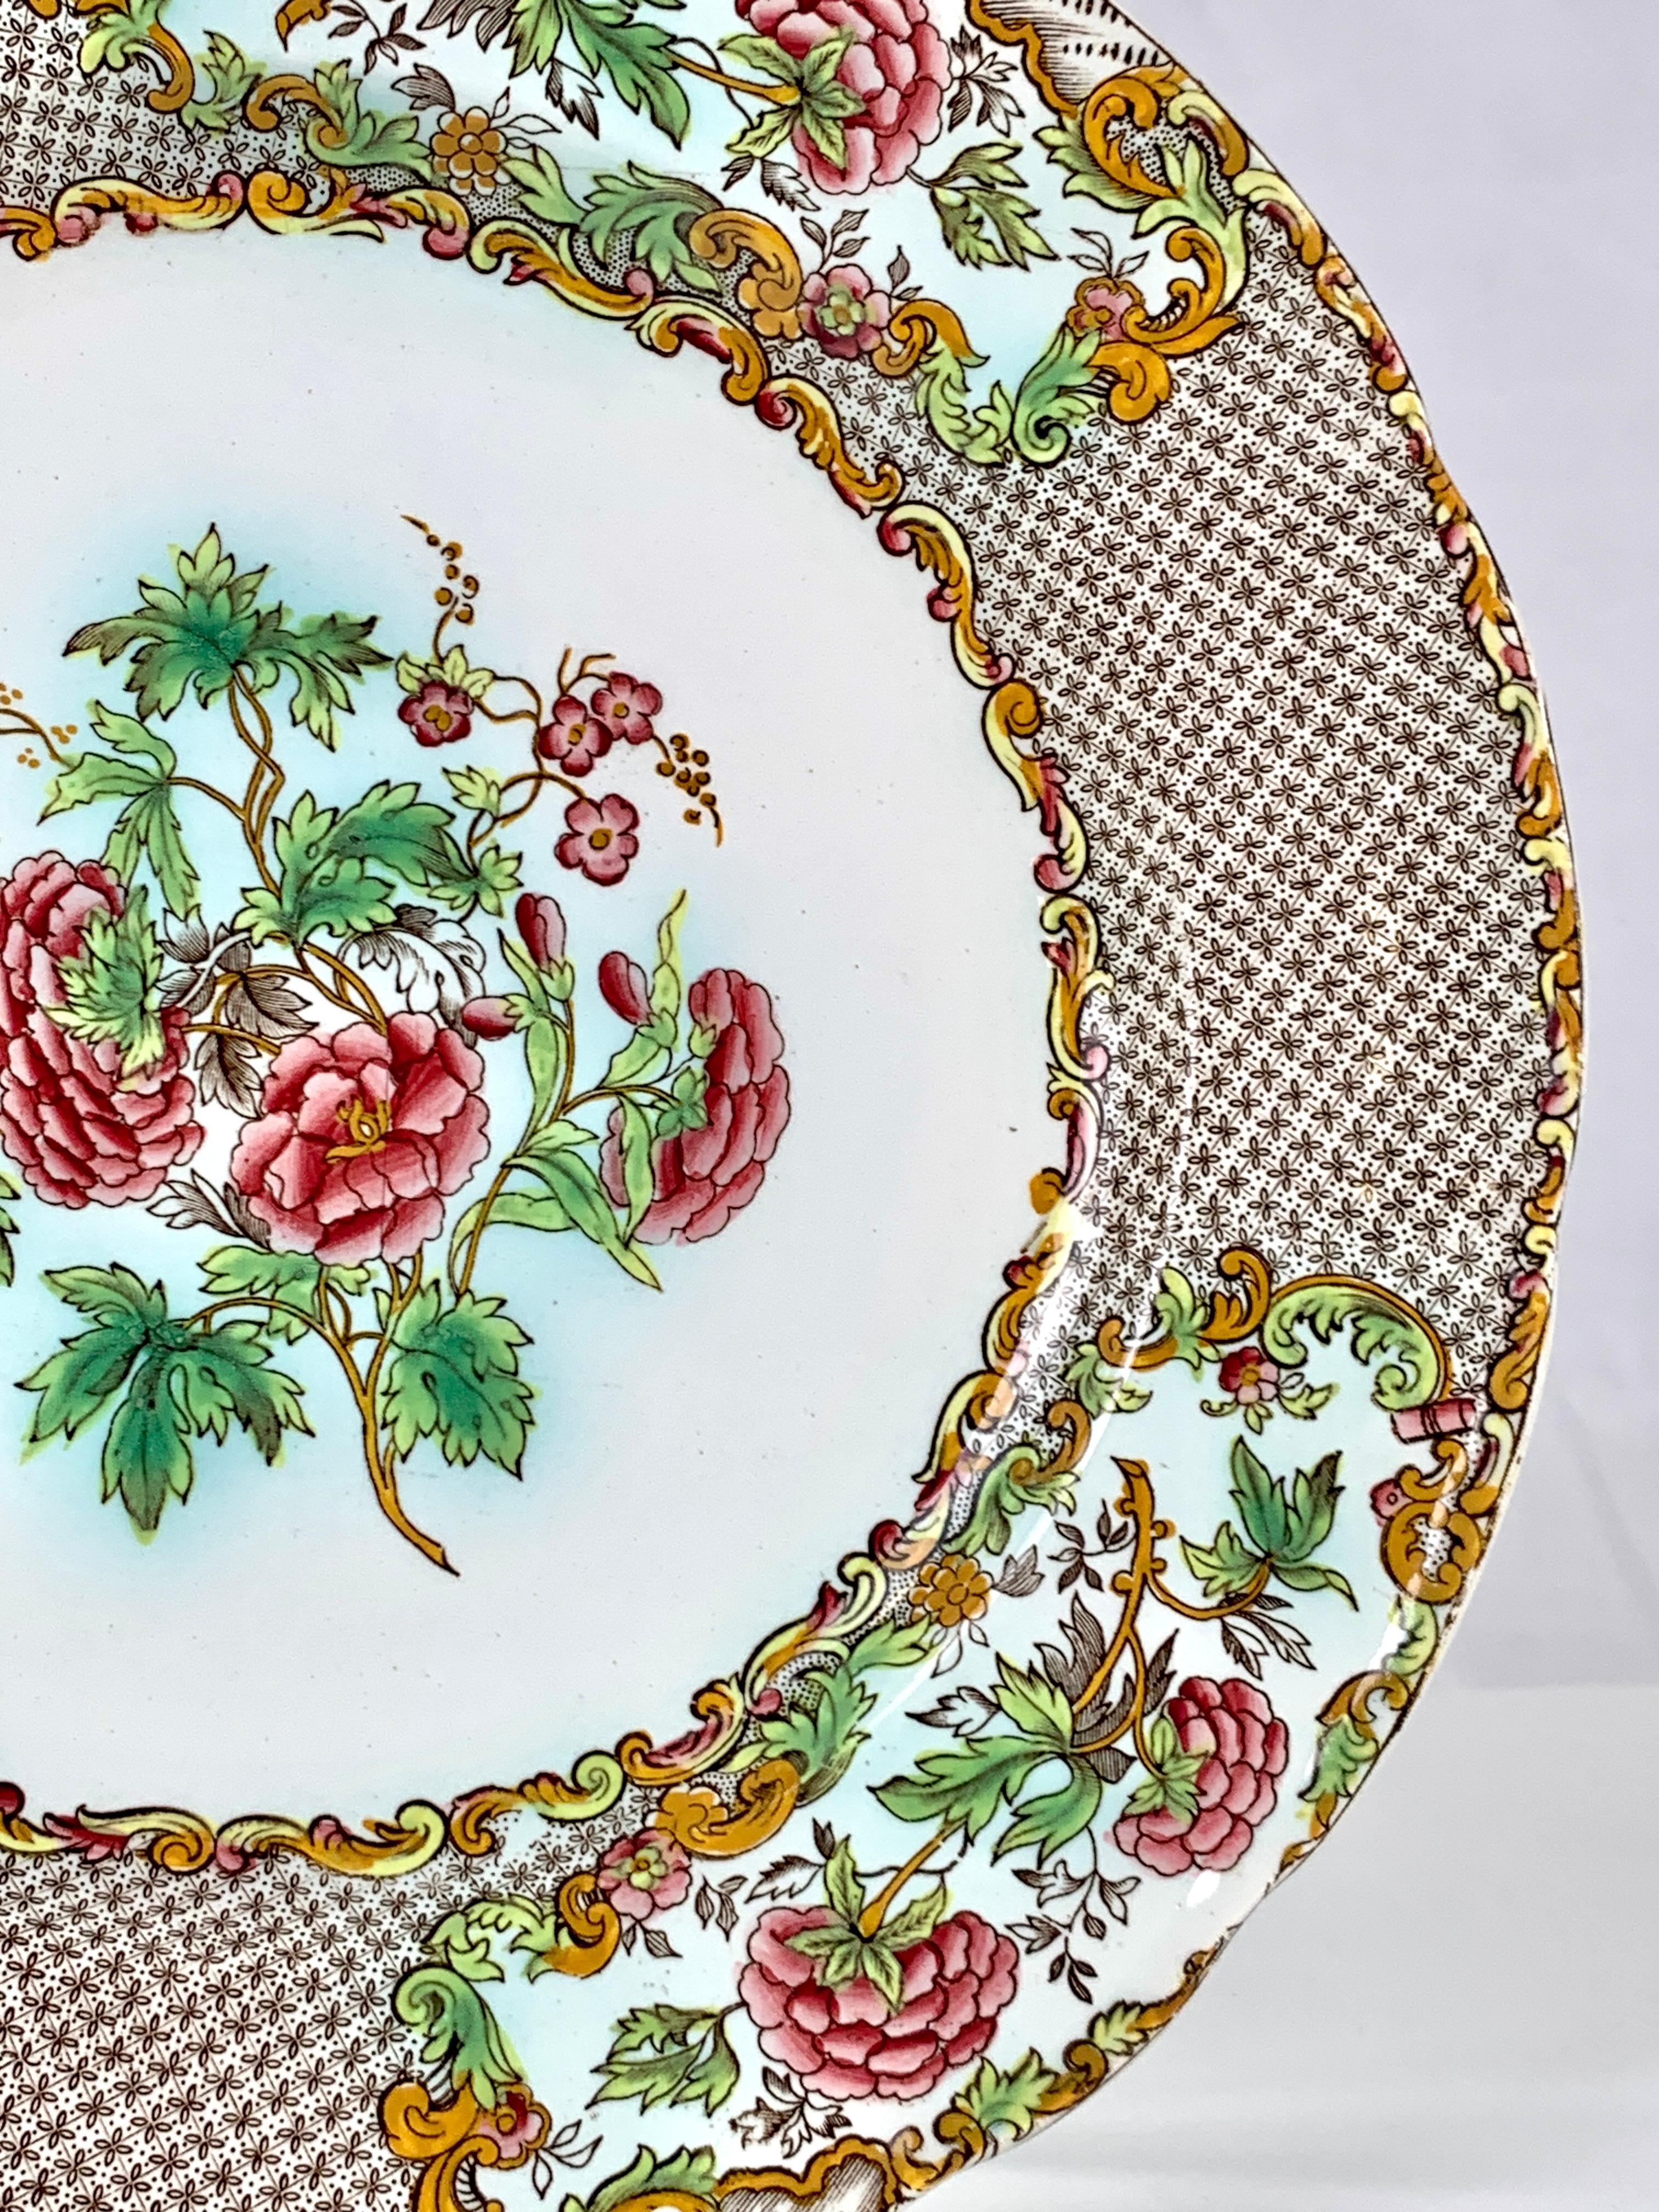 Dozen Antique Spode Dinner Plates with Pink Roses and Green Leaves Border C-1837 For Sale 1